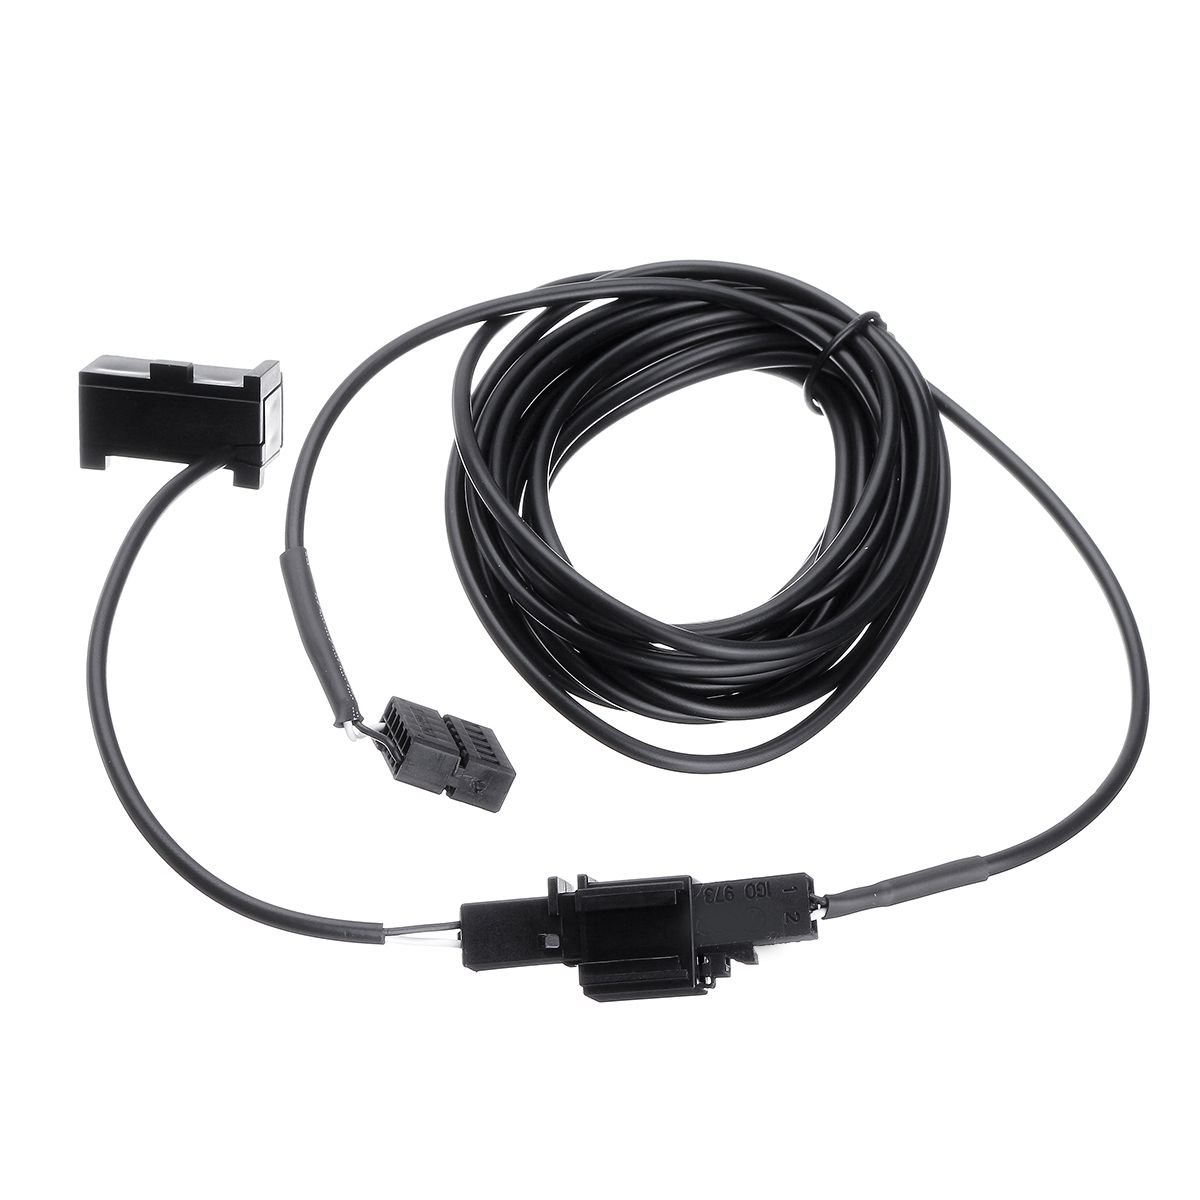 4m-Car-CD-USB-Microphone-bluetooth-Aux-Cable-Auto-Wireless-Audio-Input-Speaker-Adapter-for-BMW-1-3-S-1480556